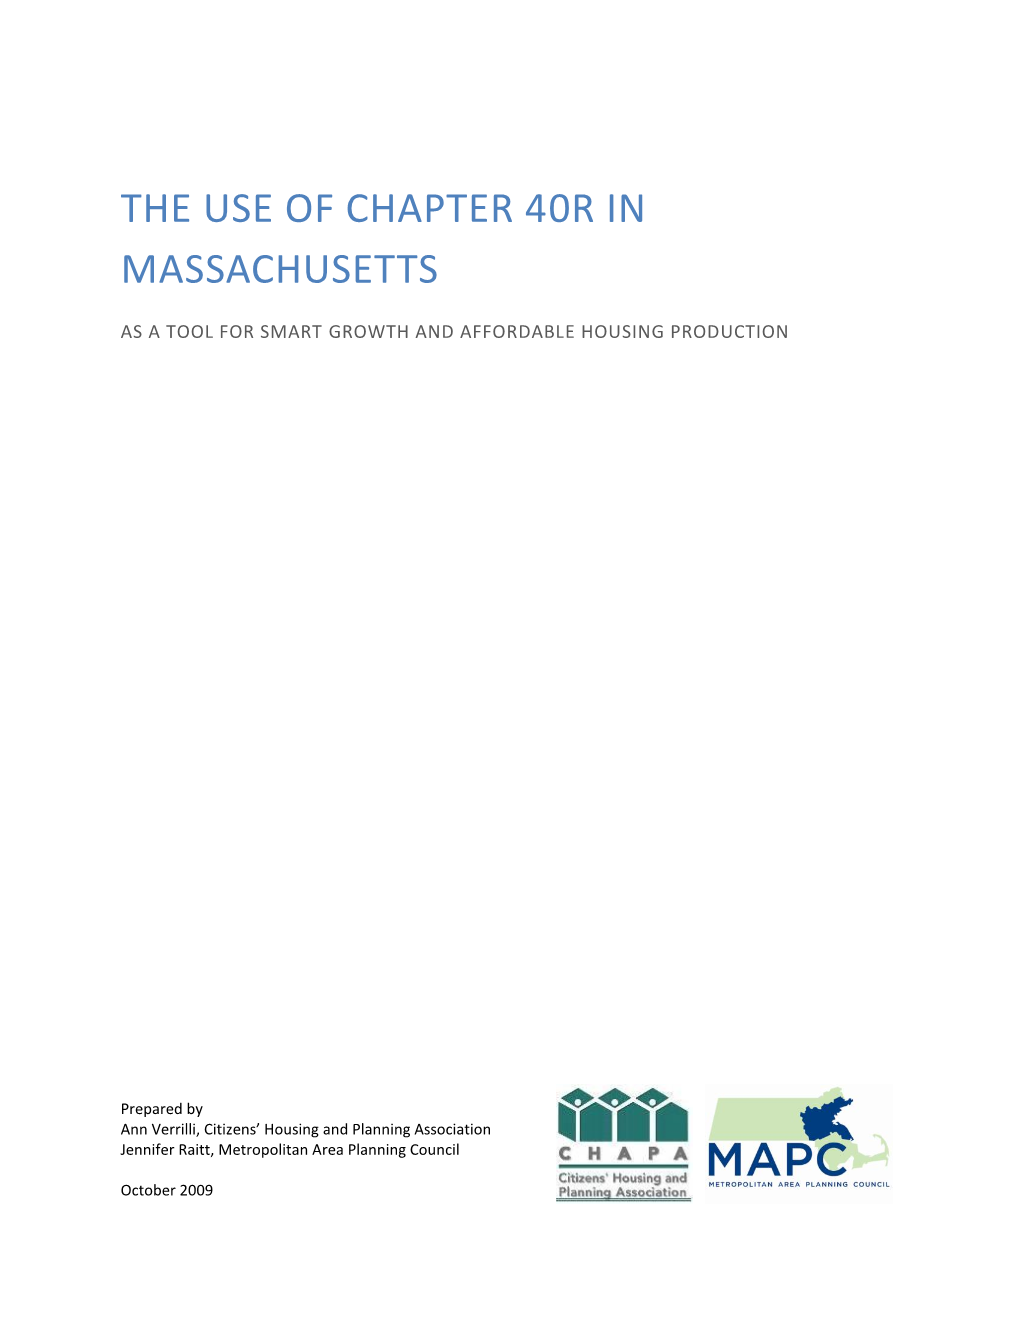 The Use of Chapter 40R in Massachusetts